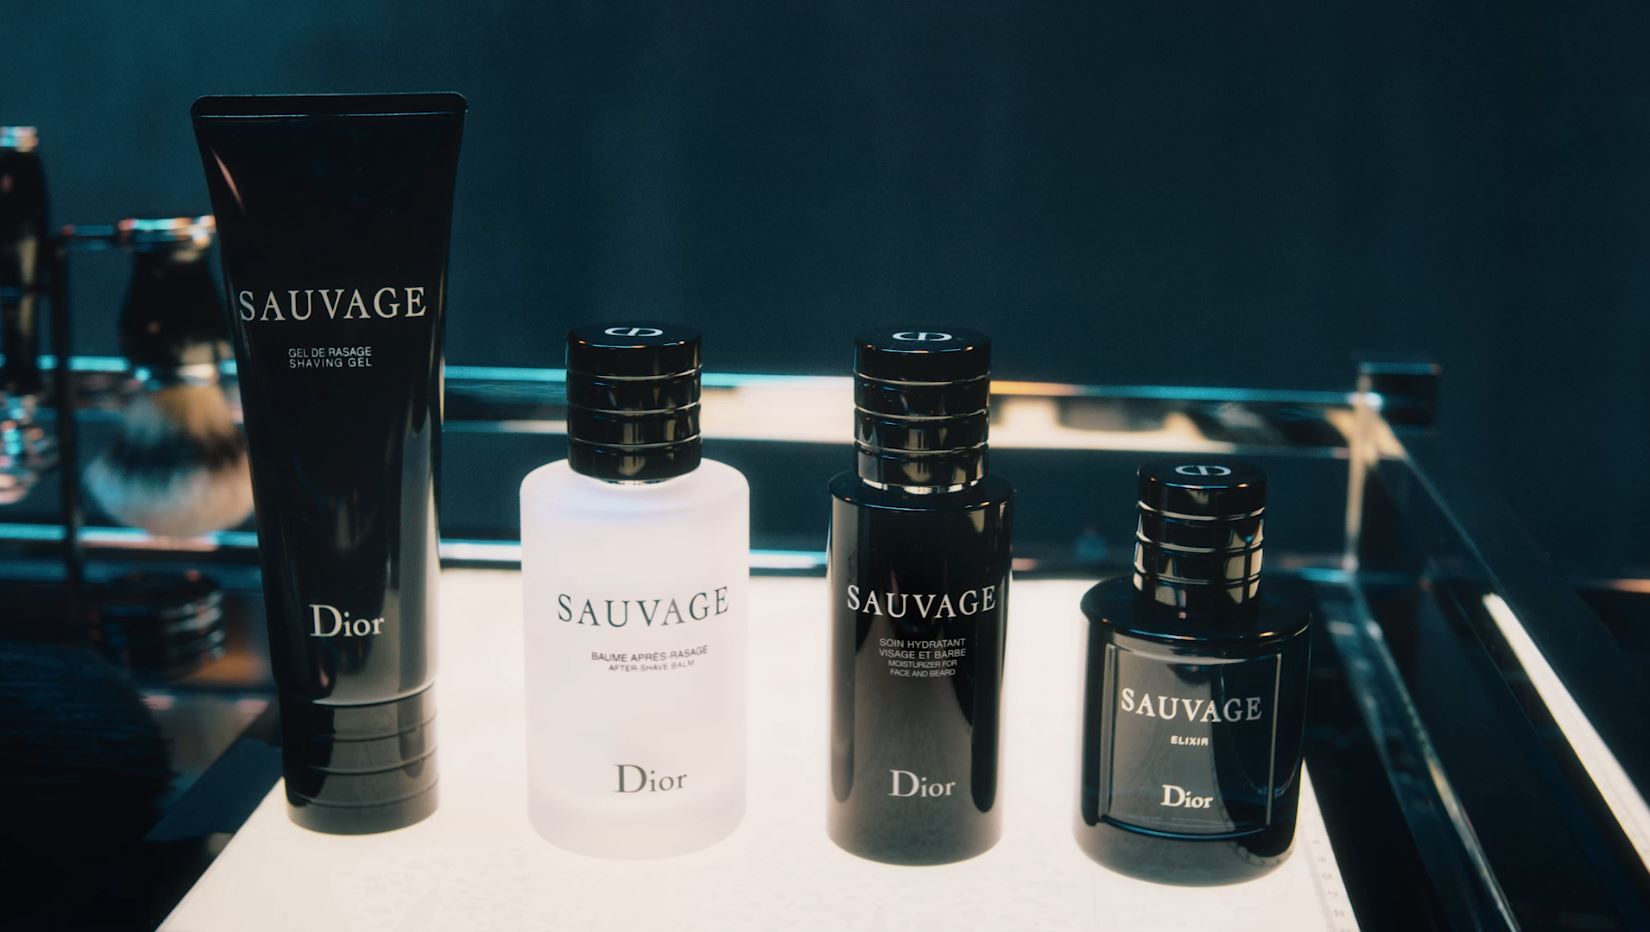 Sauvage Grooming Duo - Limited Edition Valentine's Day Fragrance Ritual Set